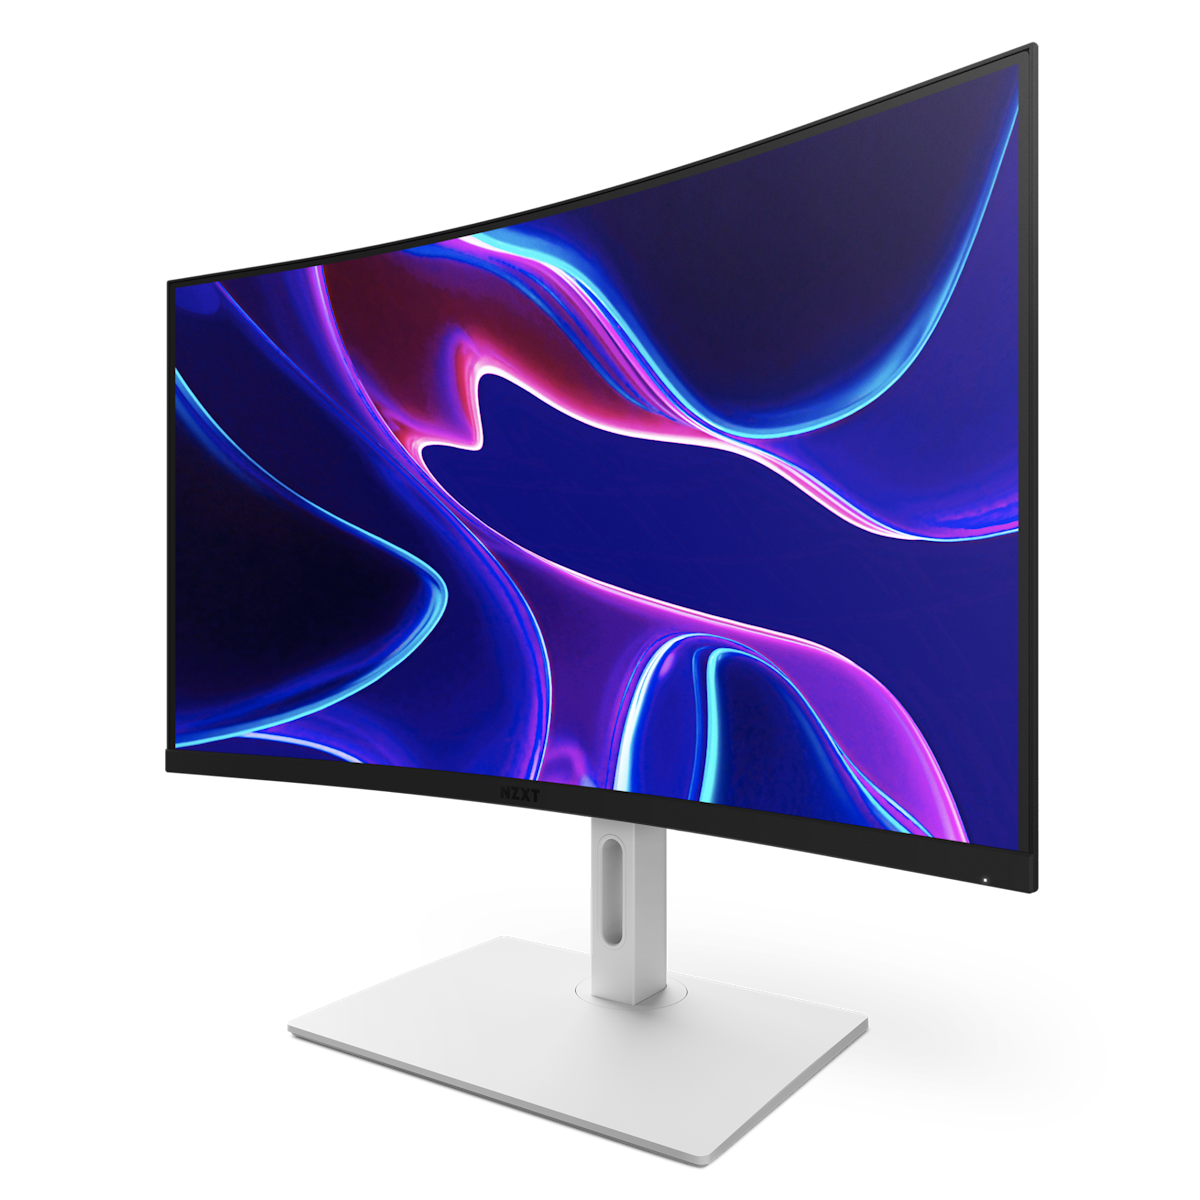 https://nzxt.com/assets/cms/34299/1658862400-canvas-32q-hero-white-wallpaper.png?auto=format&fit=max&w=1200